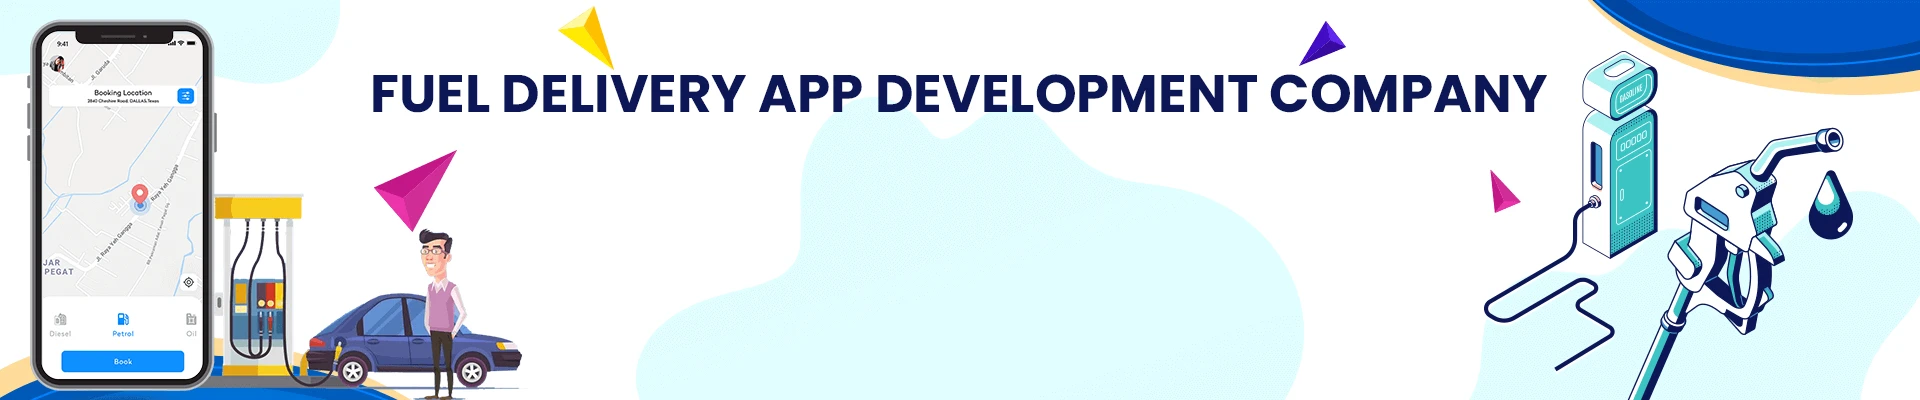 Fuel Delivery App Development Company | Fuel Delivery App Developers For Hire